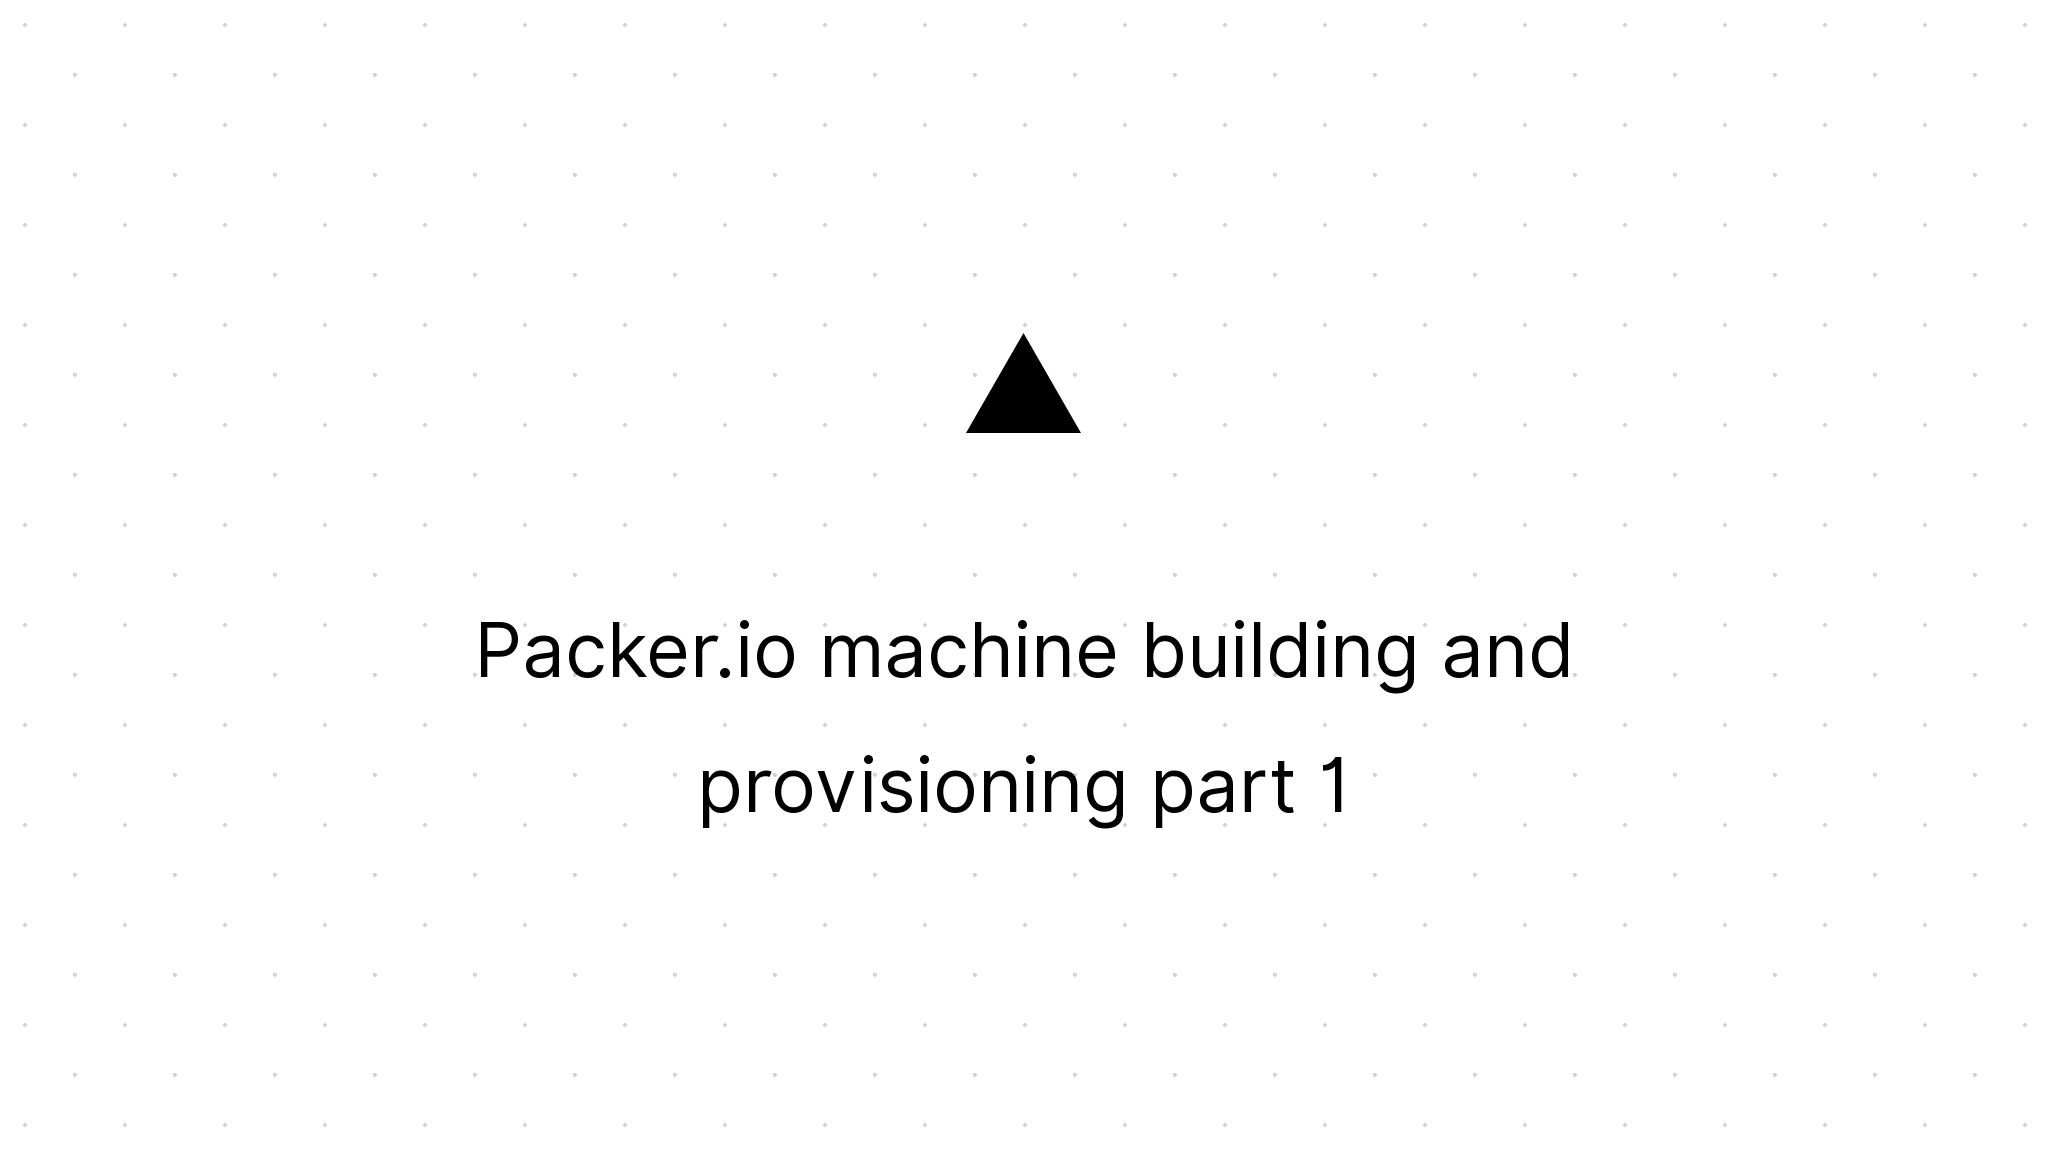 Cover Image for Packer.io machine building and provisioning part 1